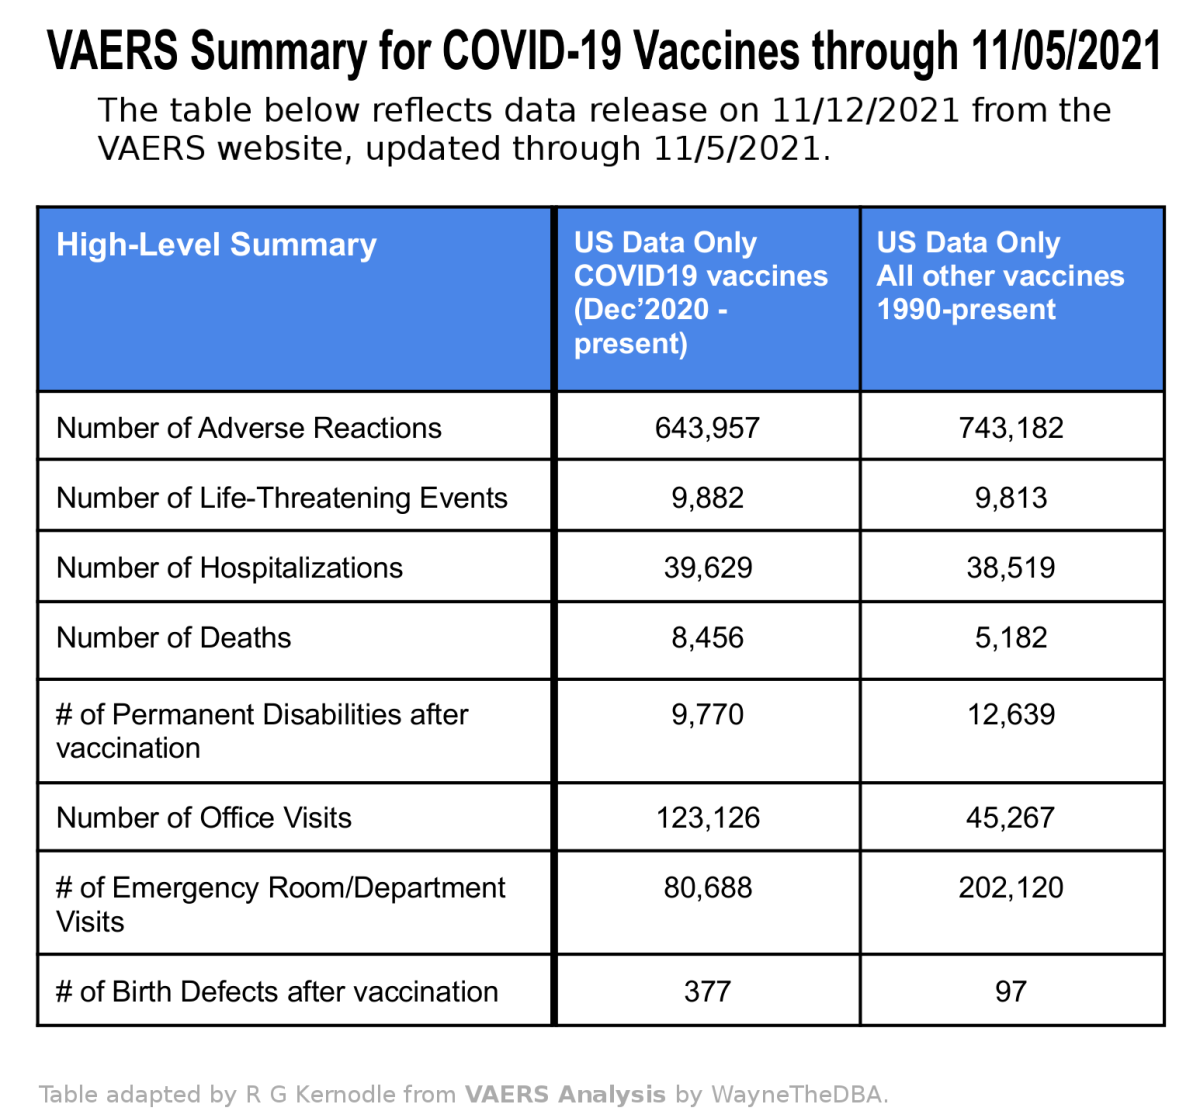 Figure 5. Table summarizing VAERS COVID-19 vaccine adverse events through 11/05/2021, adapted by R. G. Kernodle.